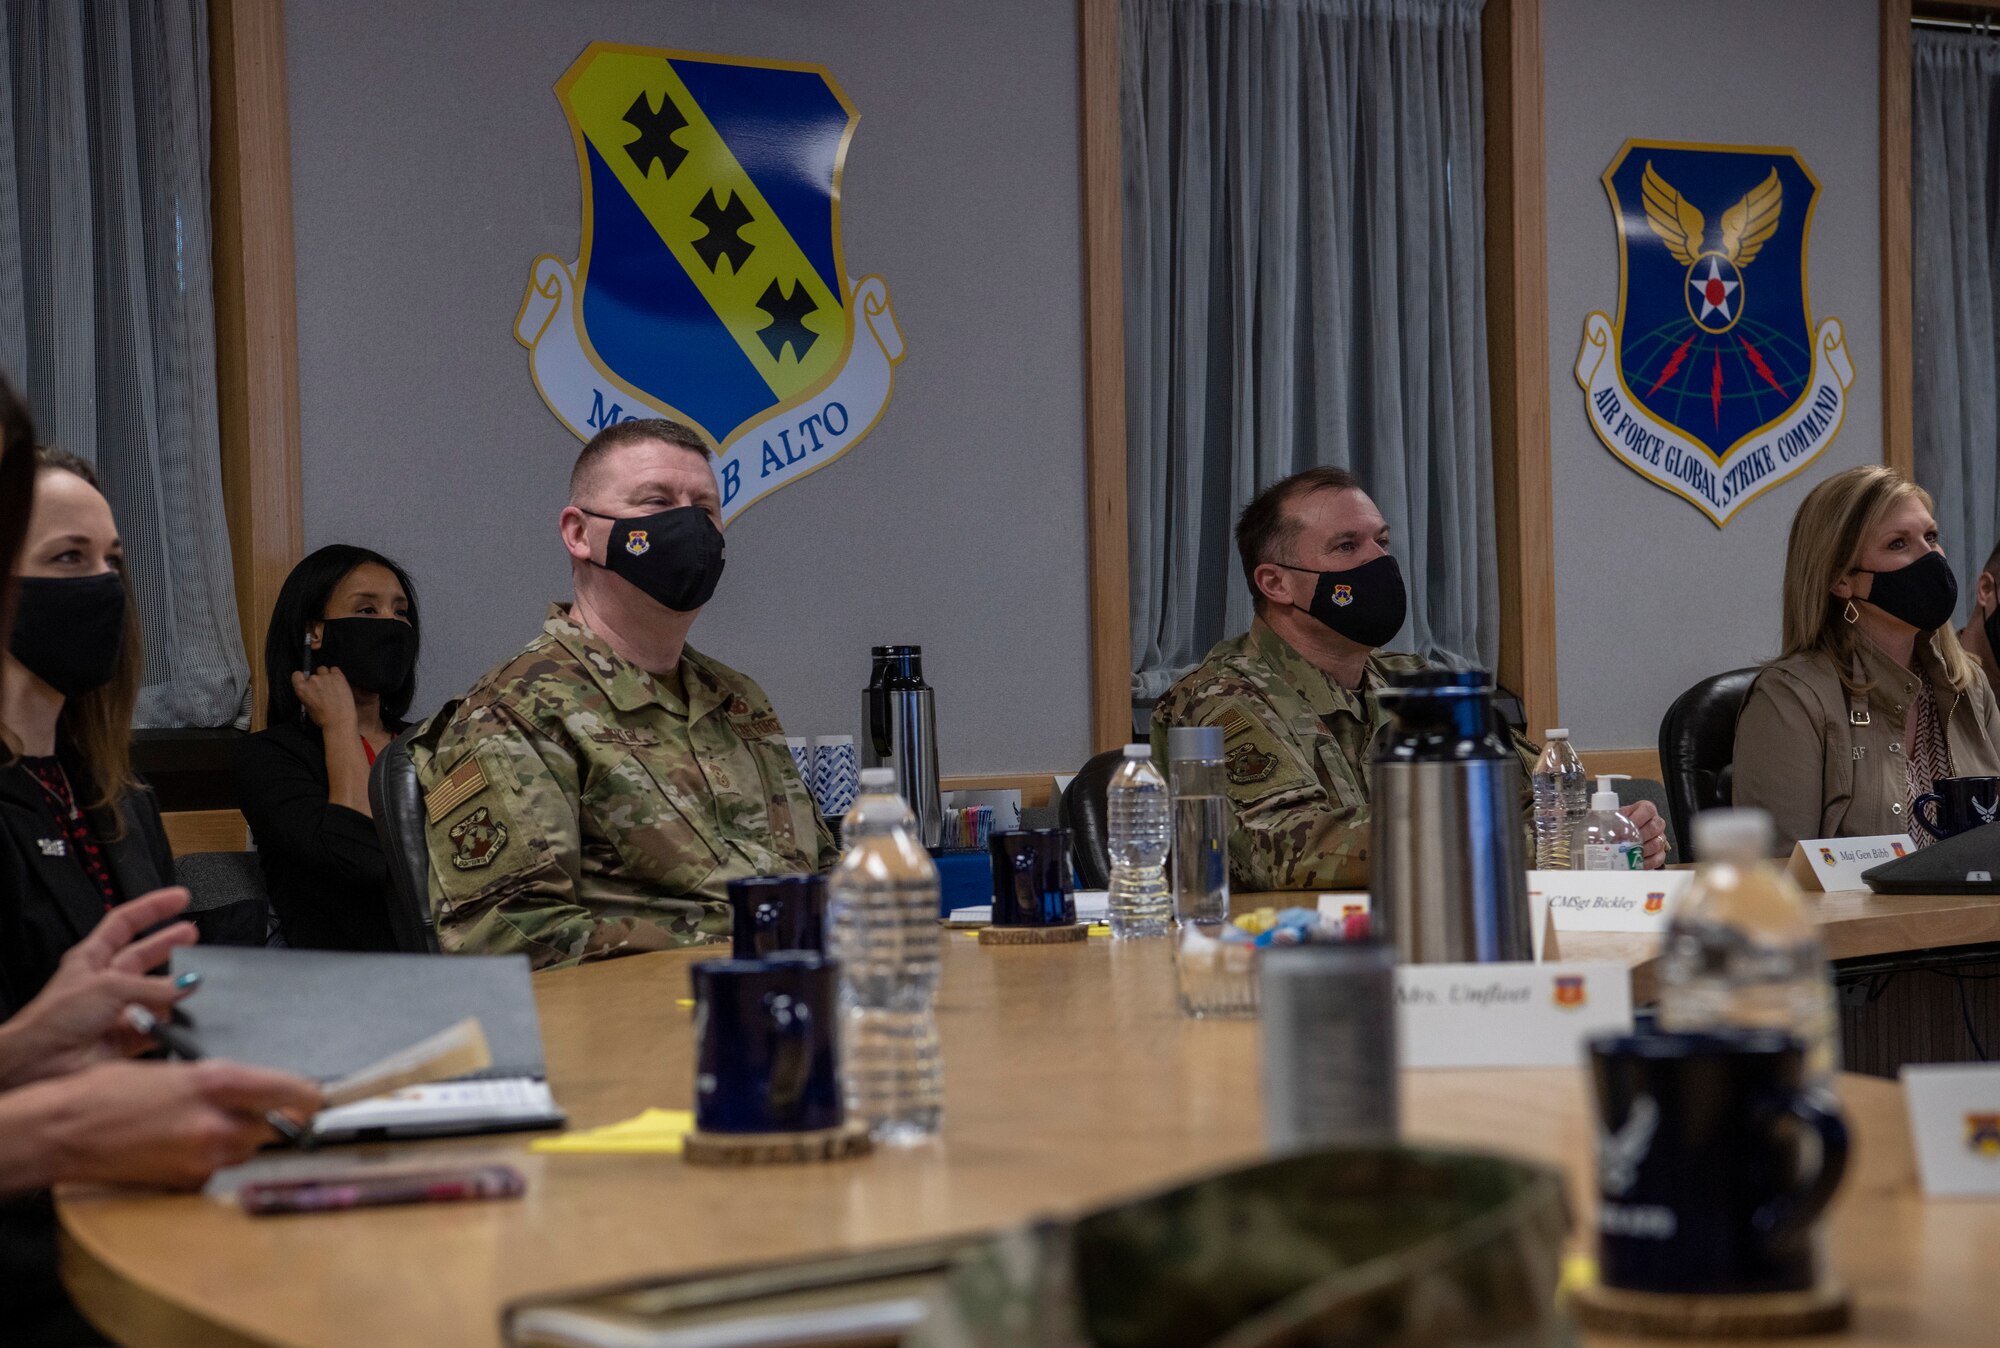 Maj. Gen. Thad Bibb, 18th Air Force commander, right, and Chief Master Sgt. Chad Bickley, 18th AF command chief, left, are briefed on Team Dyess’ missions at Dyess Air Force Base, Texas, Mar. 3, 2021